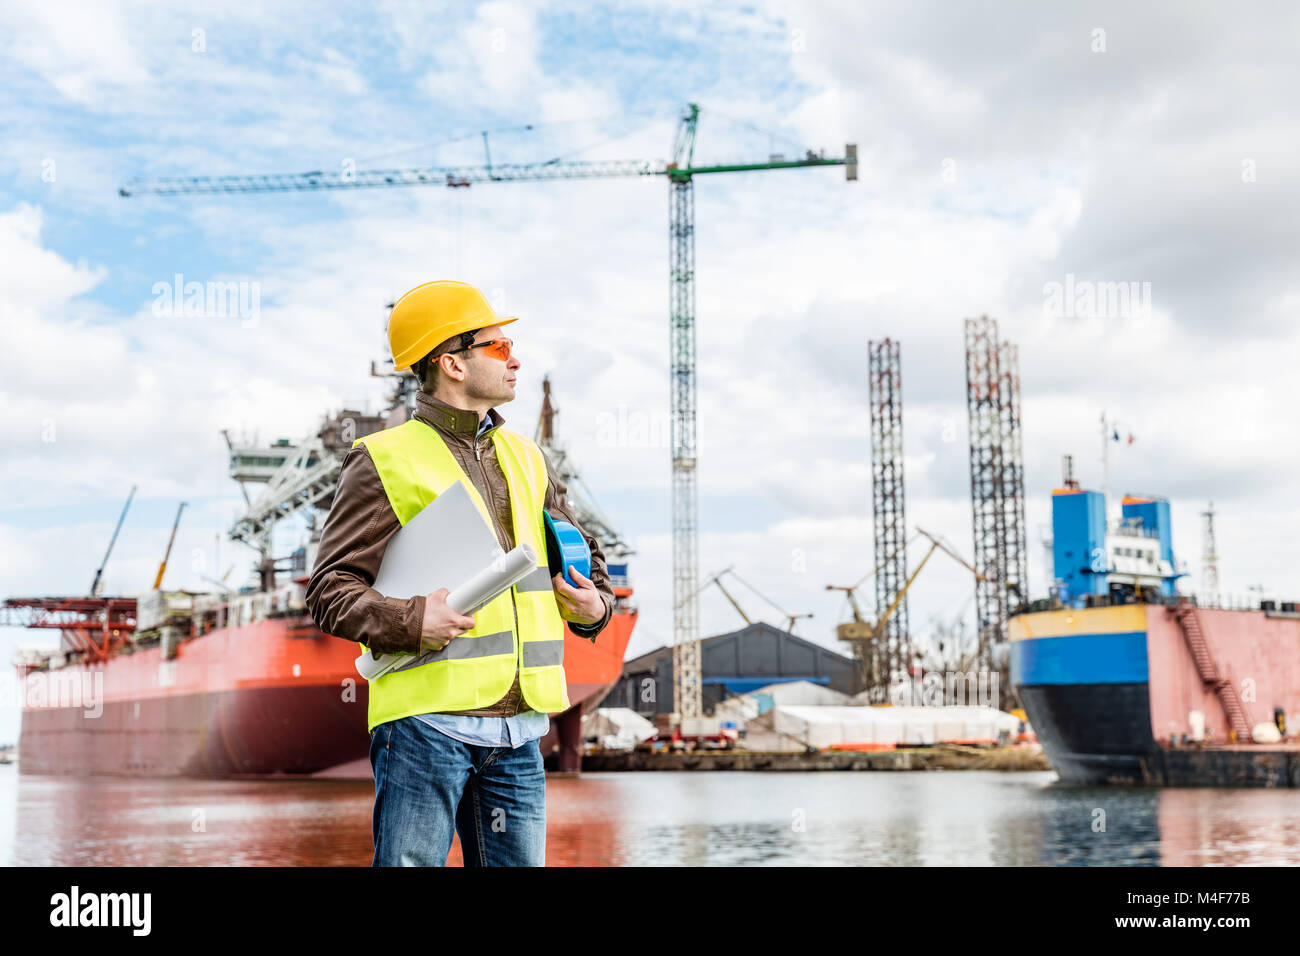 Shipbuilding engineer at the dock side in a port. Stock Photo